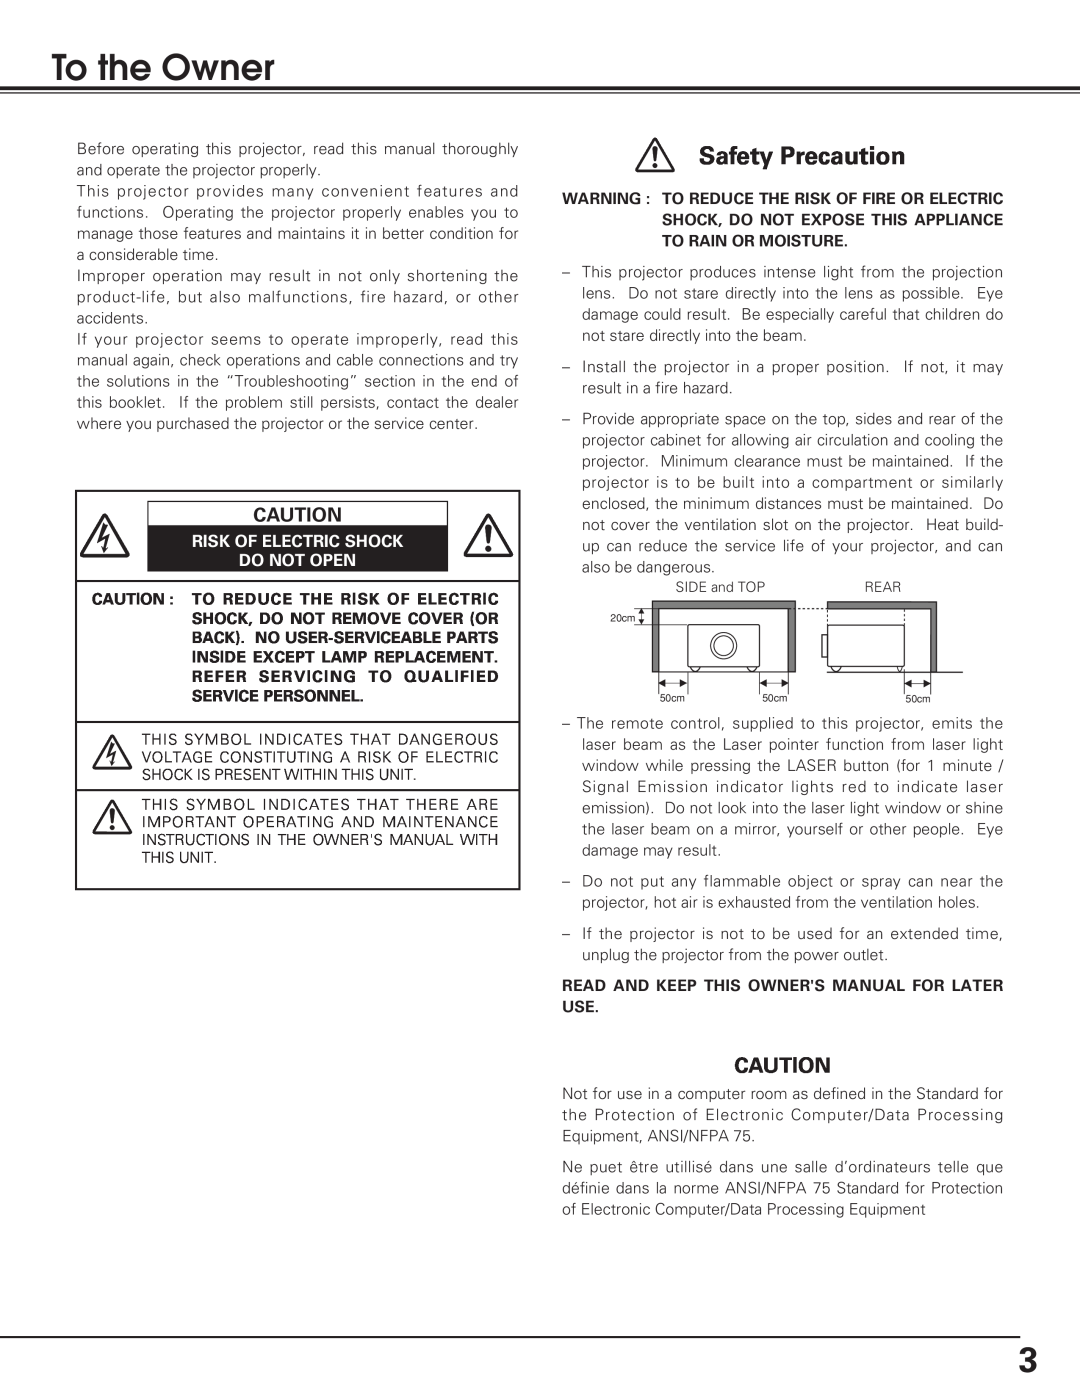 Eiki LC-XB15 owner manual To the Owner, Safety Precaution, Risk Of Electric Shock Do Not Open 